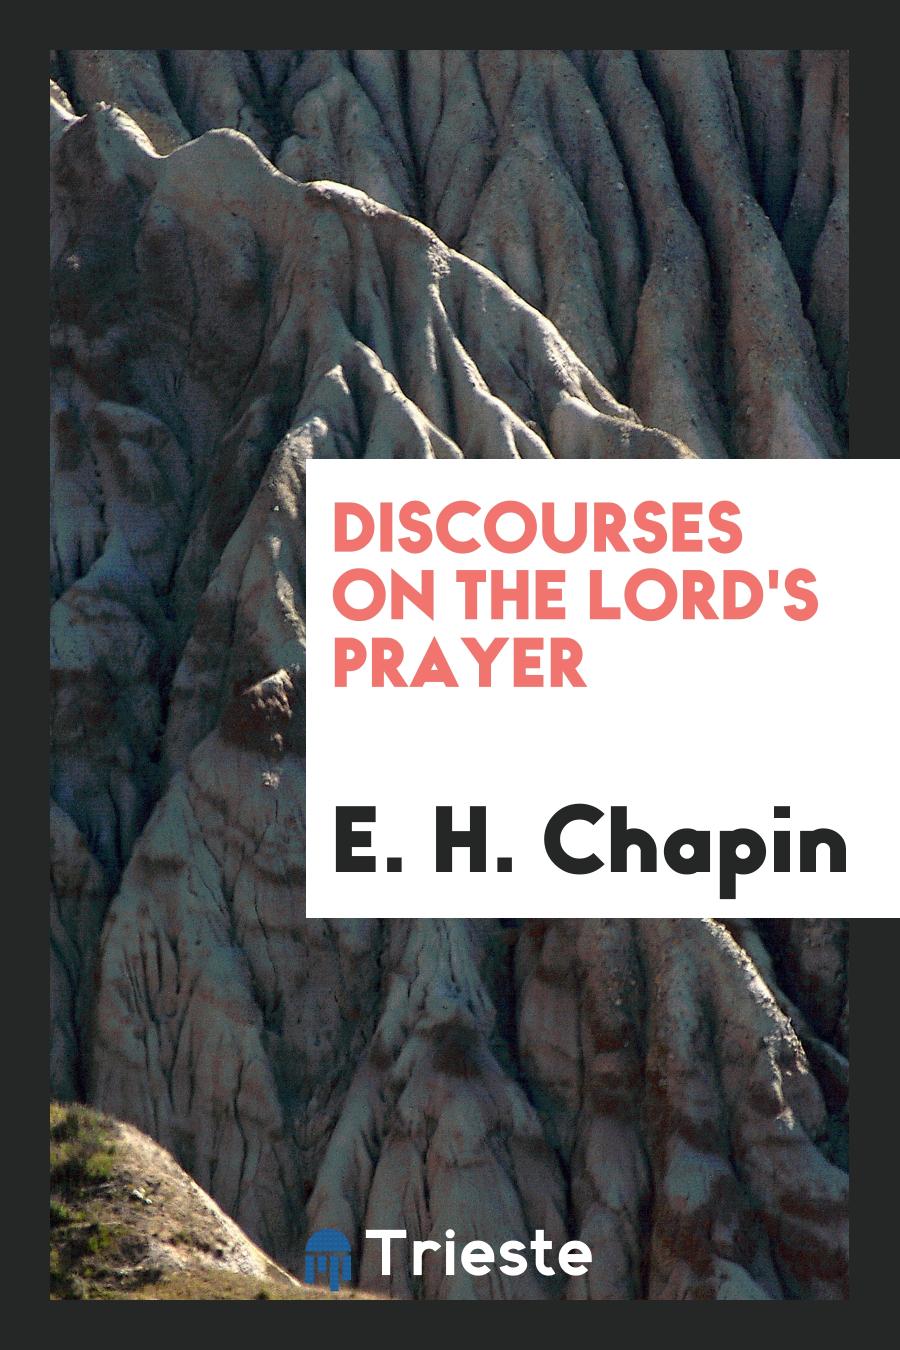 E. H. Chapin - Discourses on the Lord's Prayer